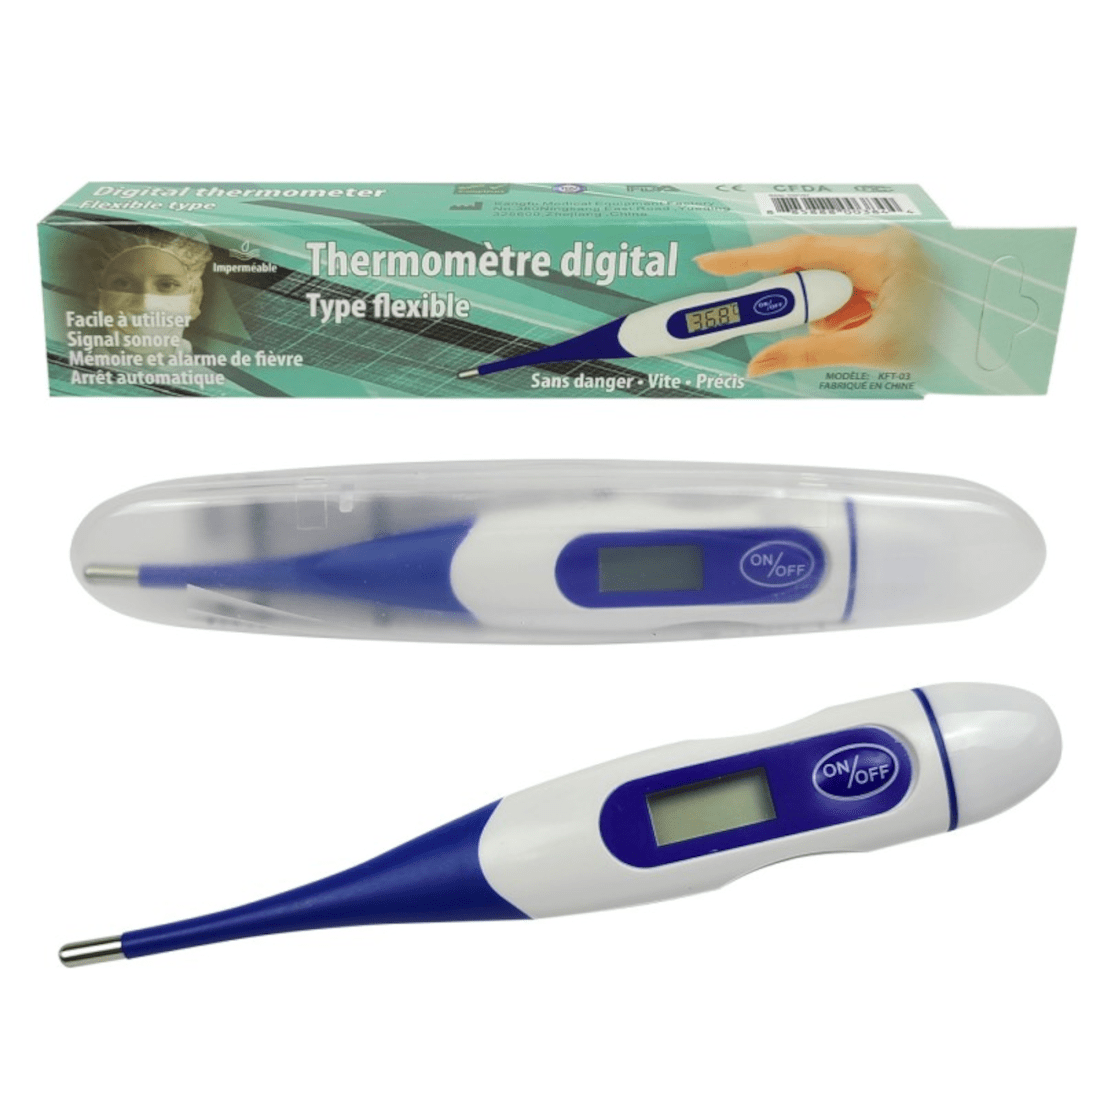 Digital thermometer with disposable tips to take axillary temperature